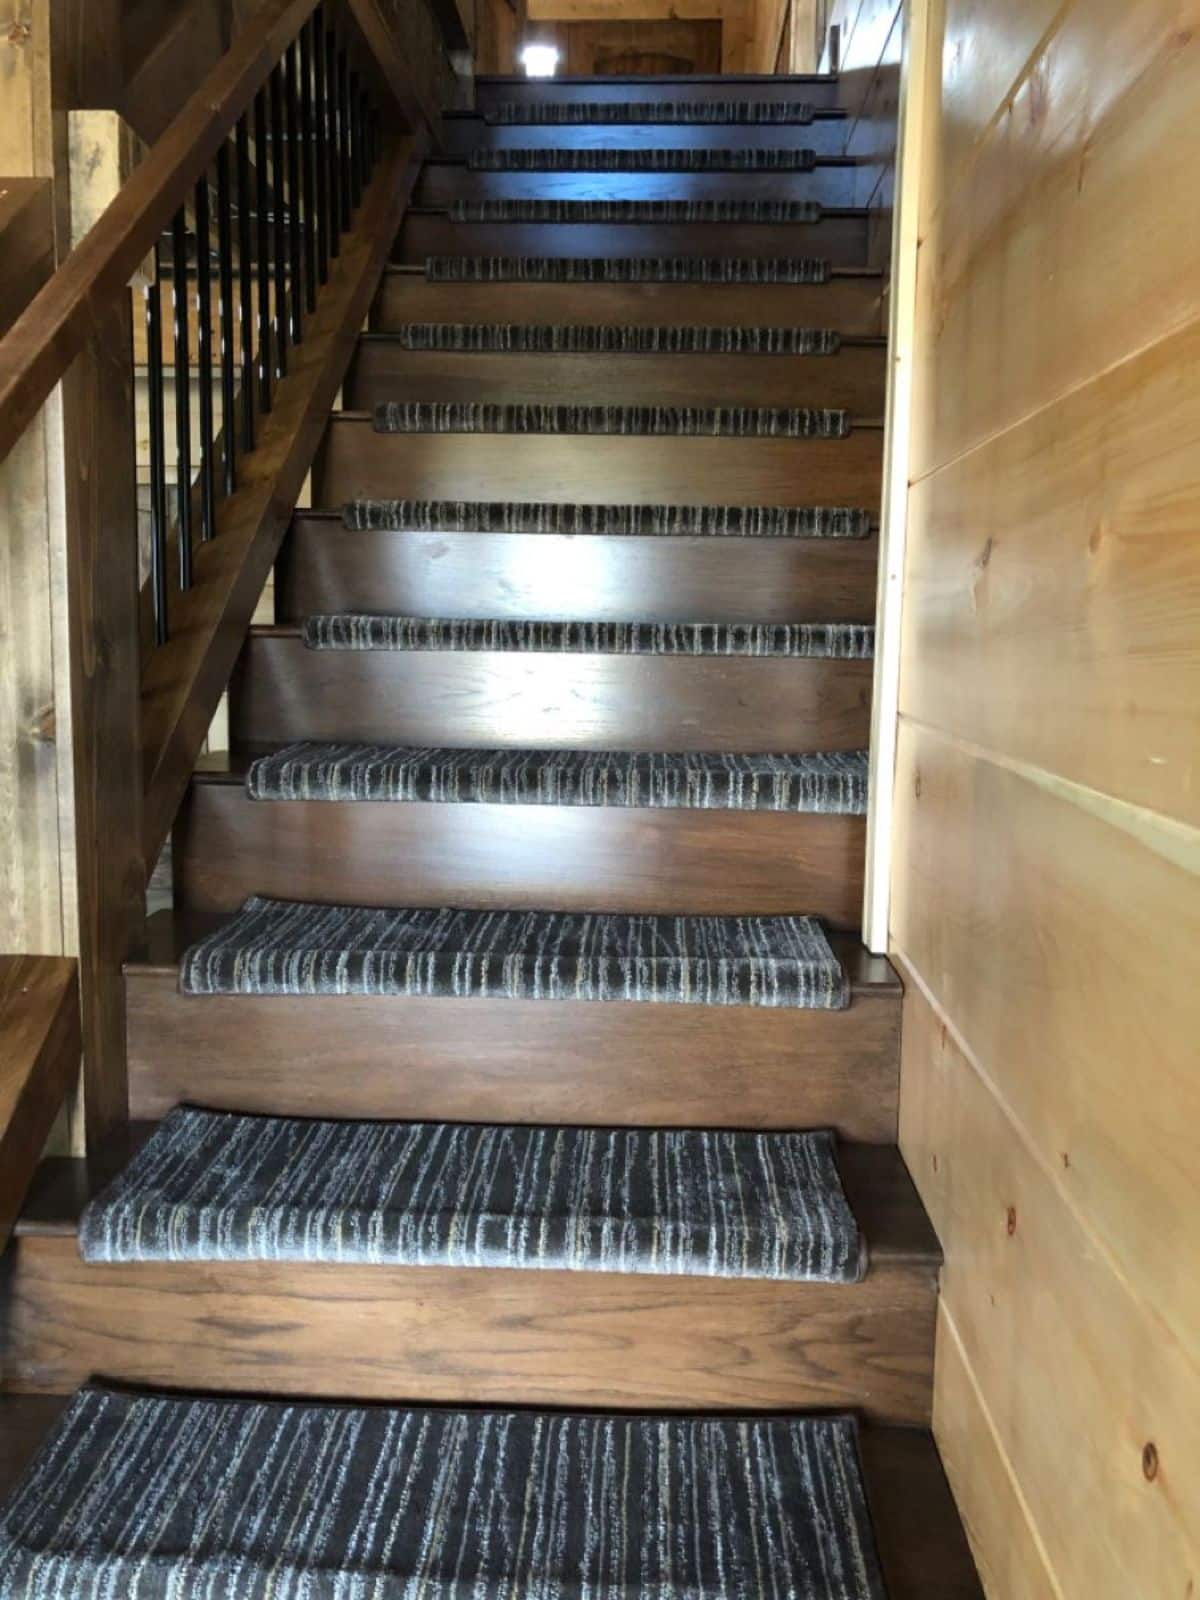 carpet on stairs leading to second level